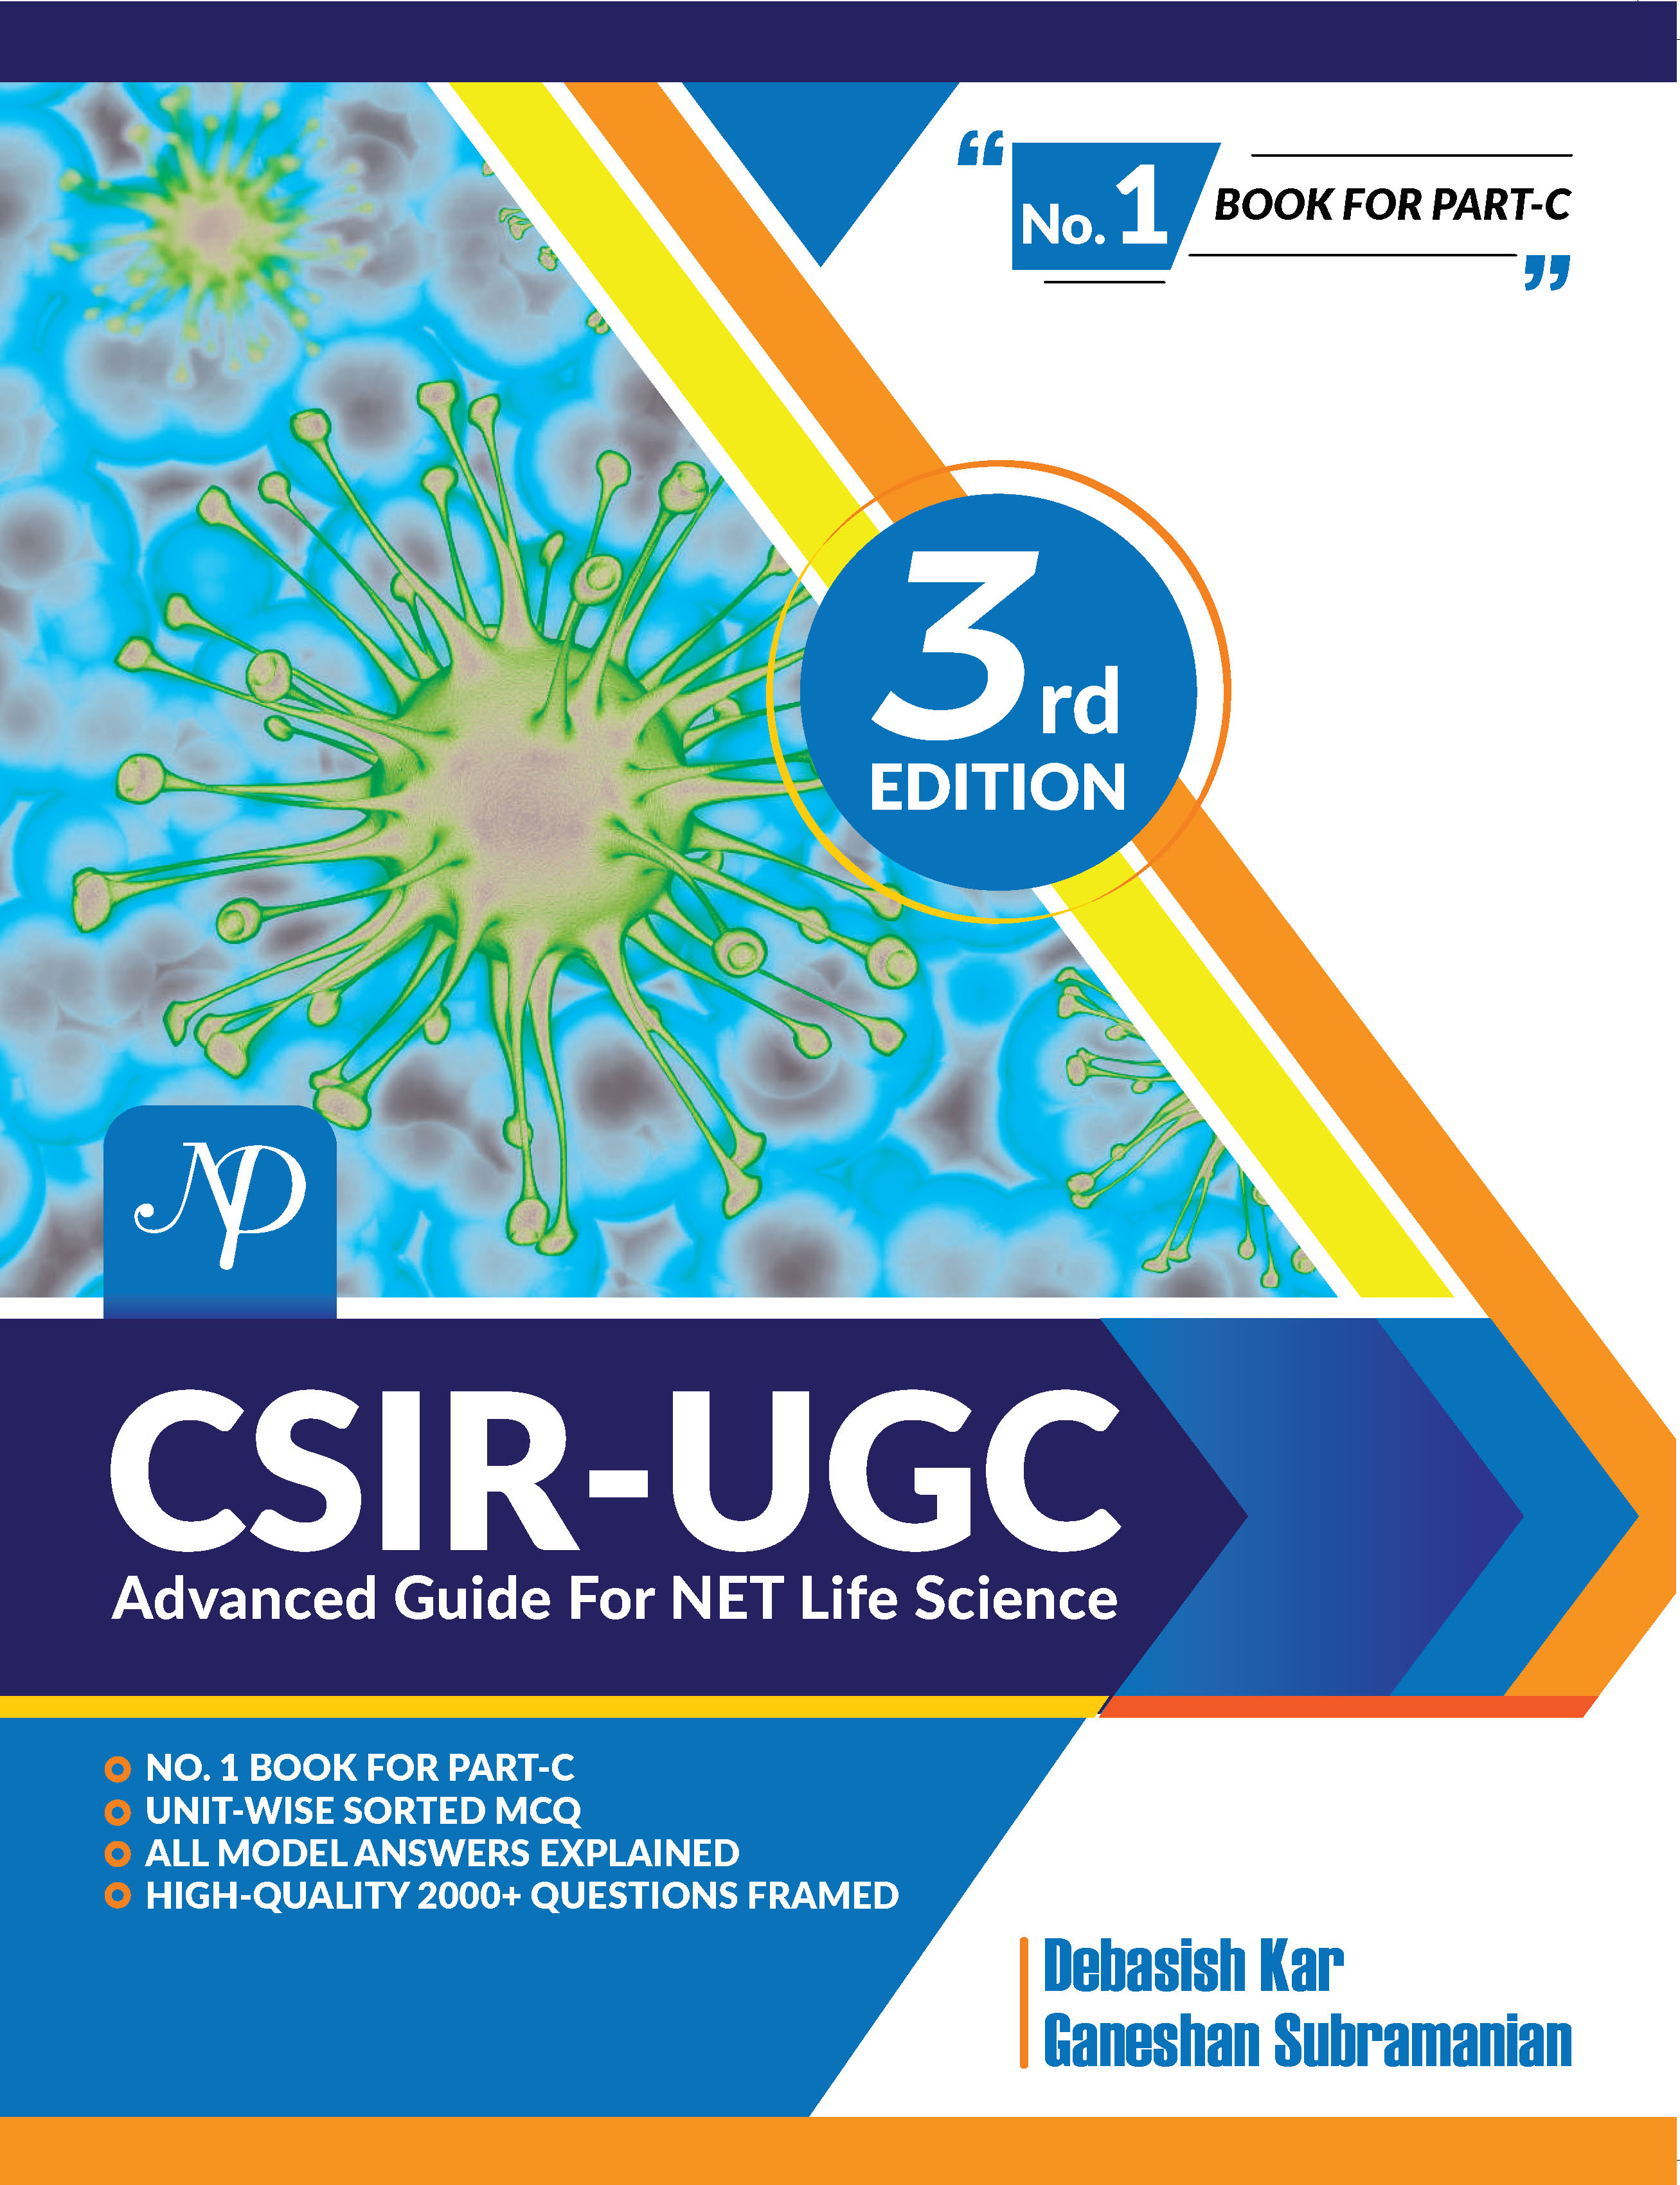 NEW DELHI PUBLISHERS - CSIR-UGC Advanced guide for NET Life Science 3rd  Edition